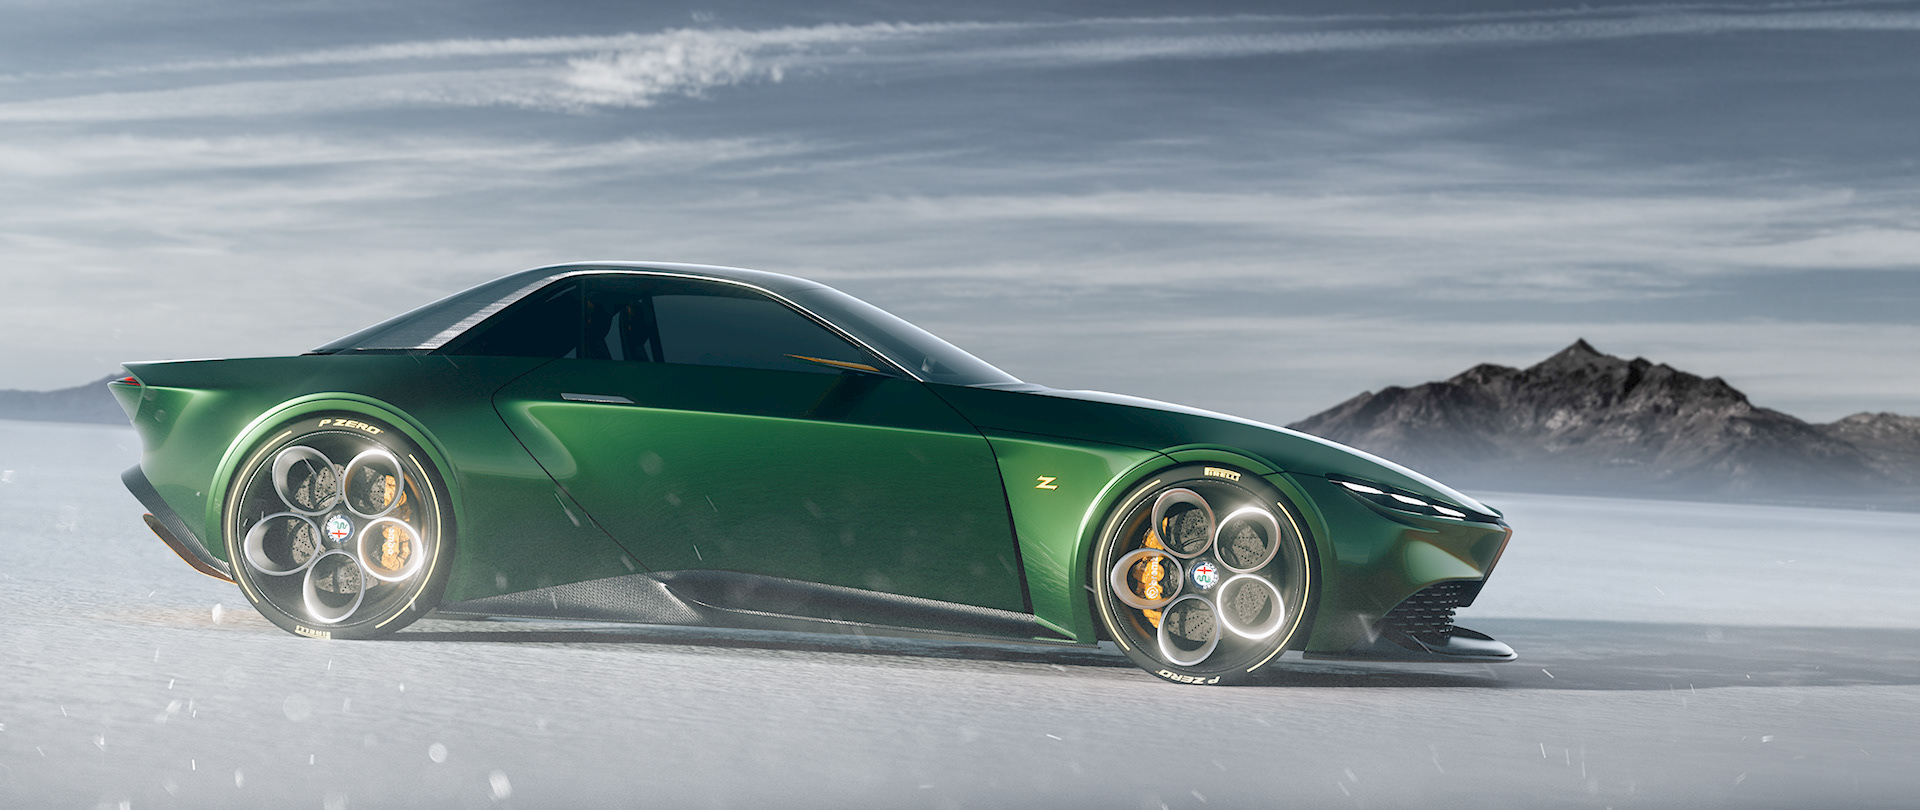 Alfa Romeo And Zagato Need To Make This Gt Junior Coupe A Reality Carscoops